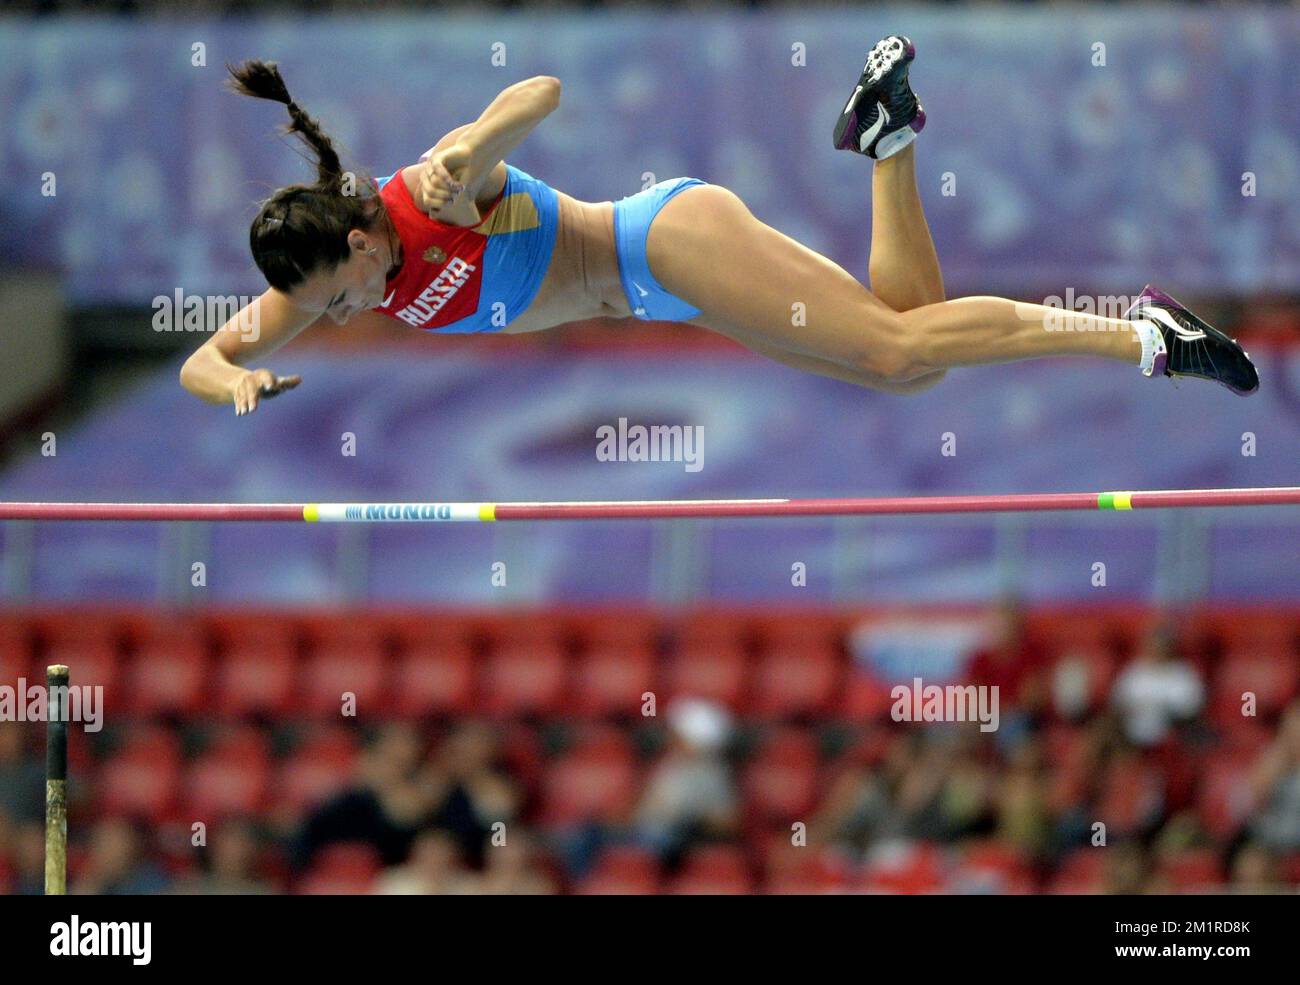 Russian Yelena Isinbayeva in action at the World Athletics Championships at the Luzhniki Stadium in Moscow, Russia, Tuesday 13 August 2013. The World Championships are taking place from 10 to 18 August.  Stock Photo